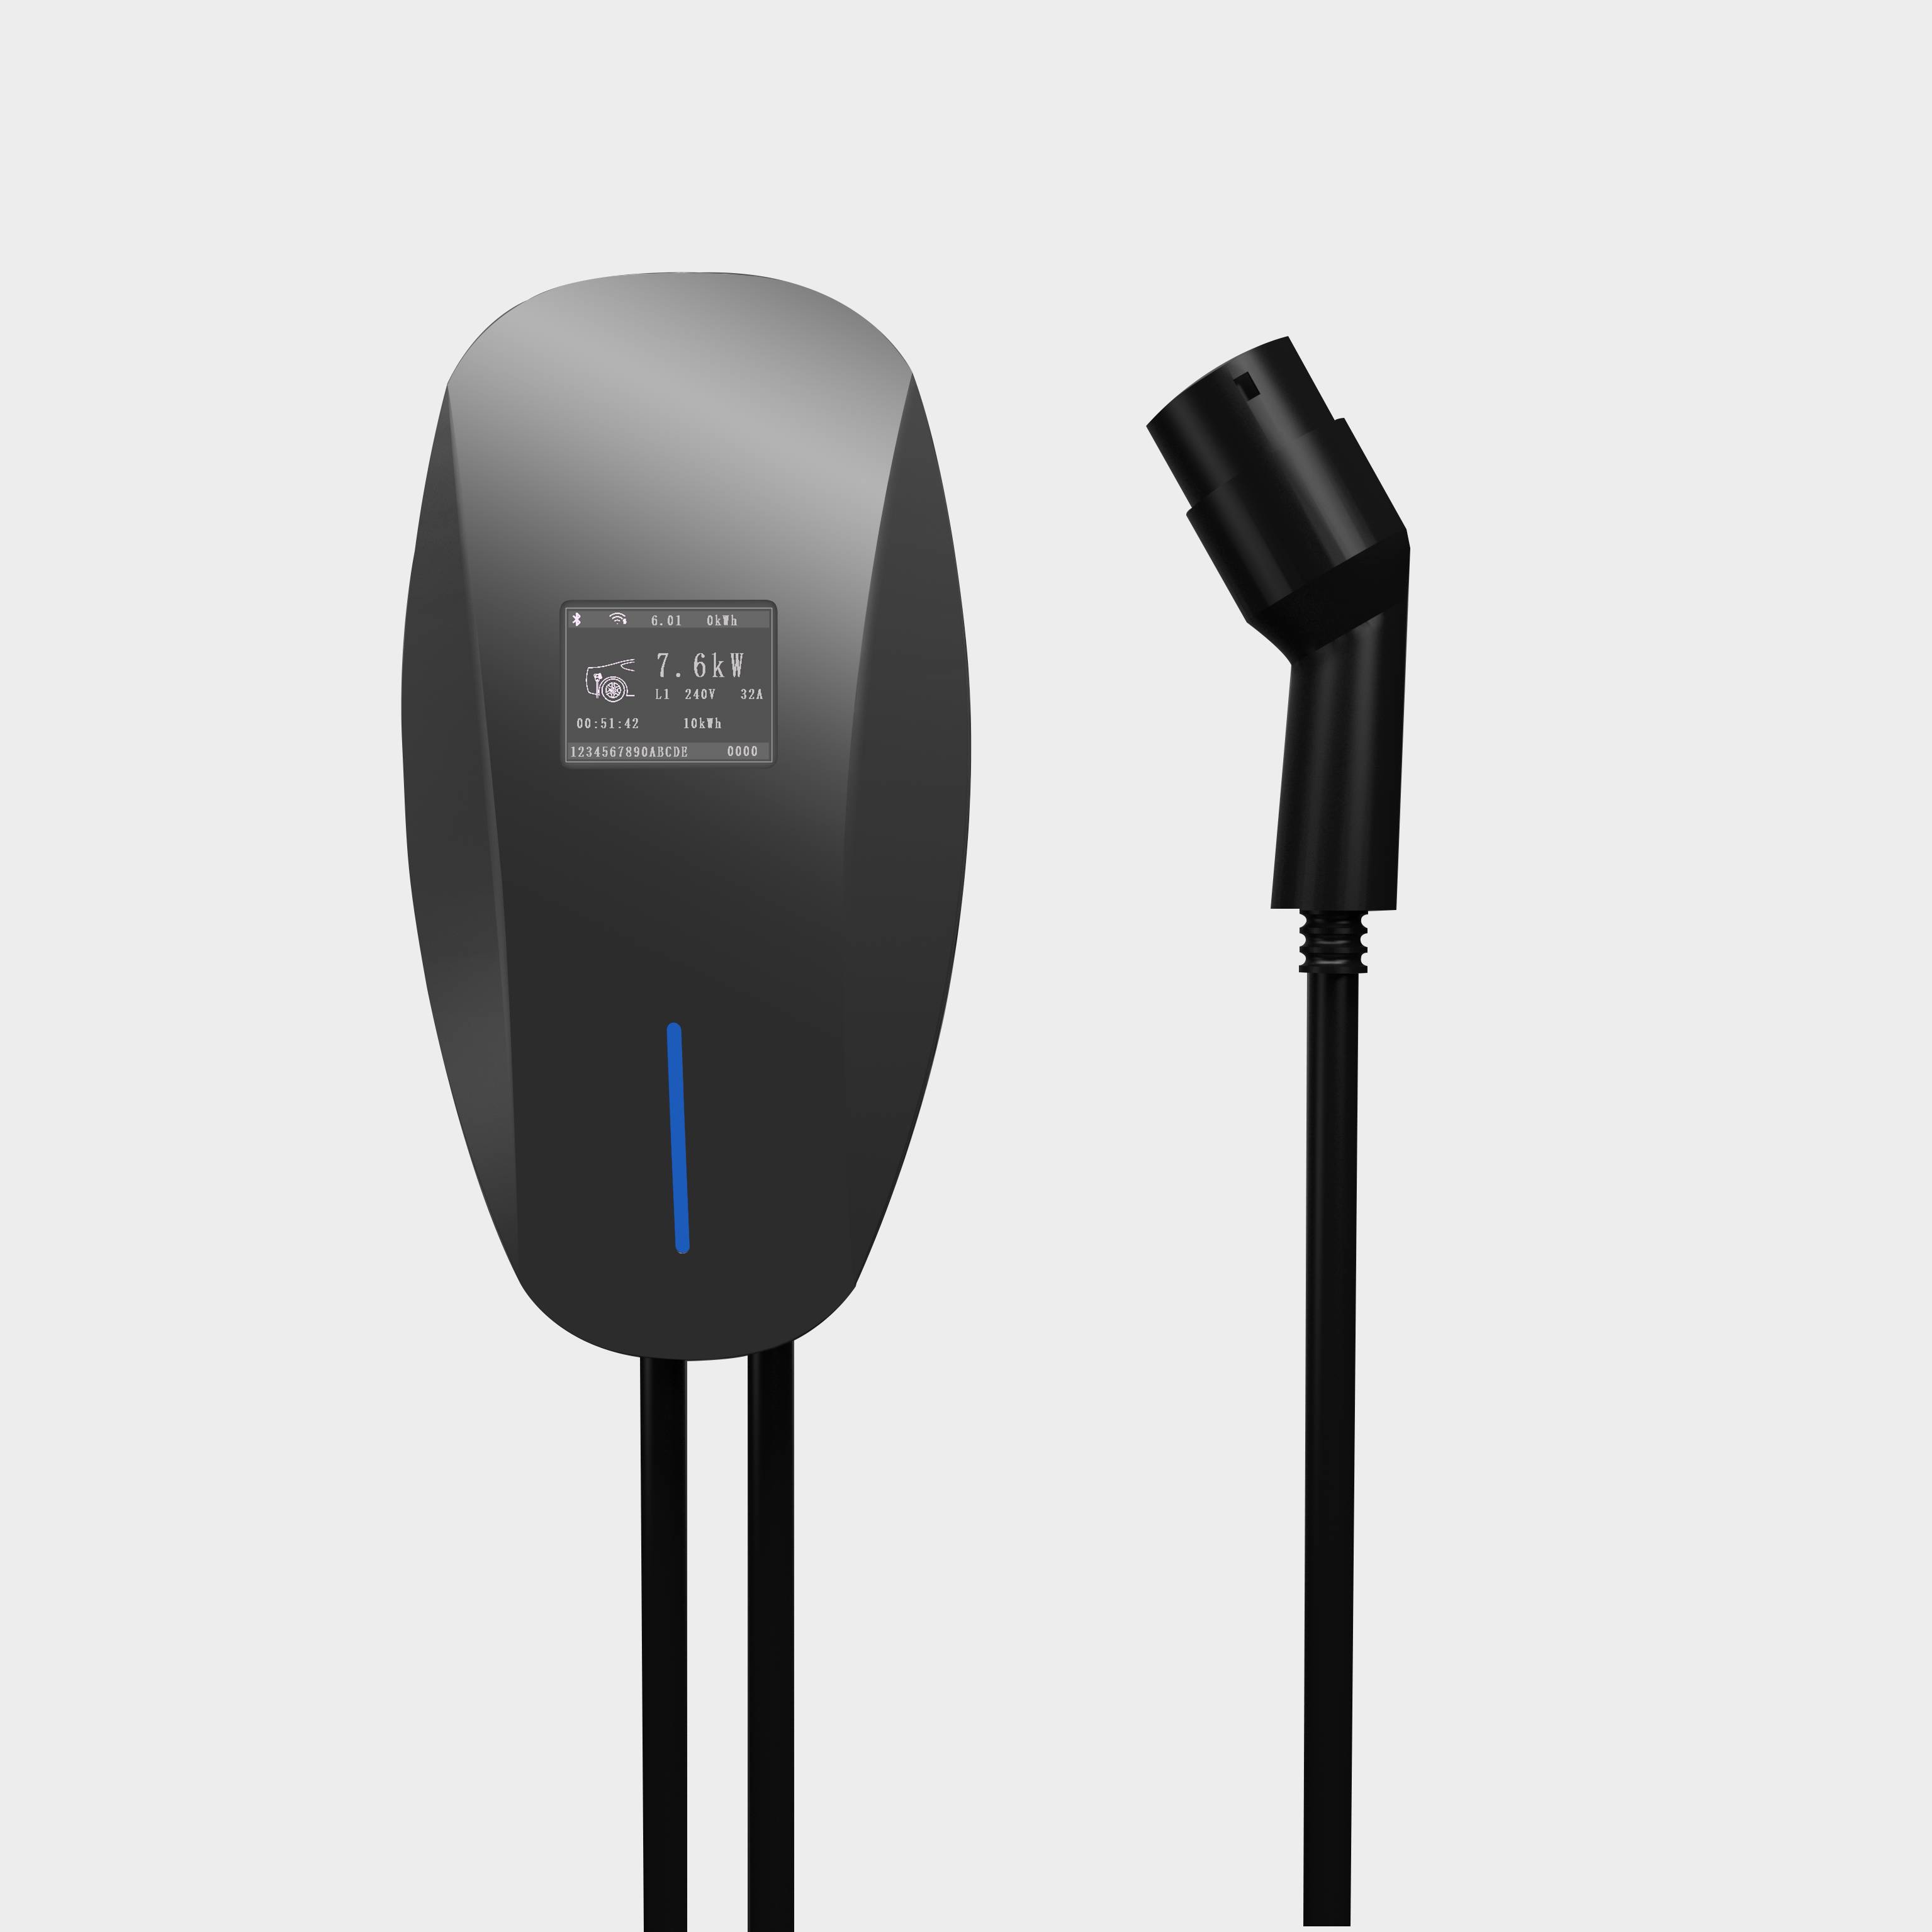 https://www.wievcharger.com/ac-ev-charging-stations-hm-series-product/